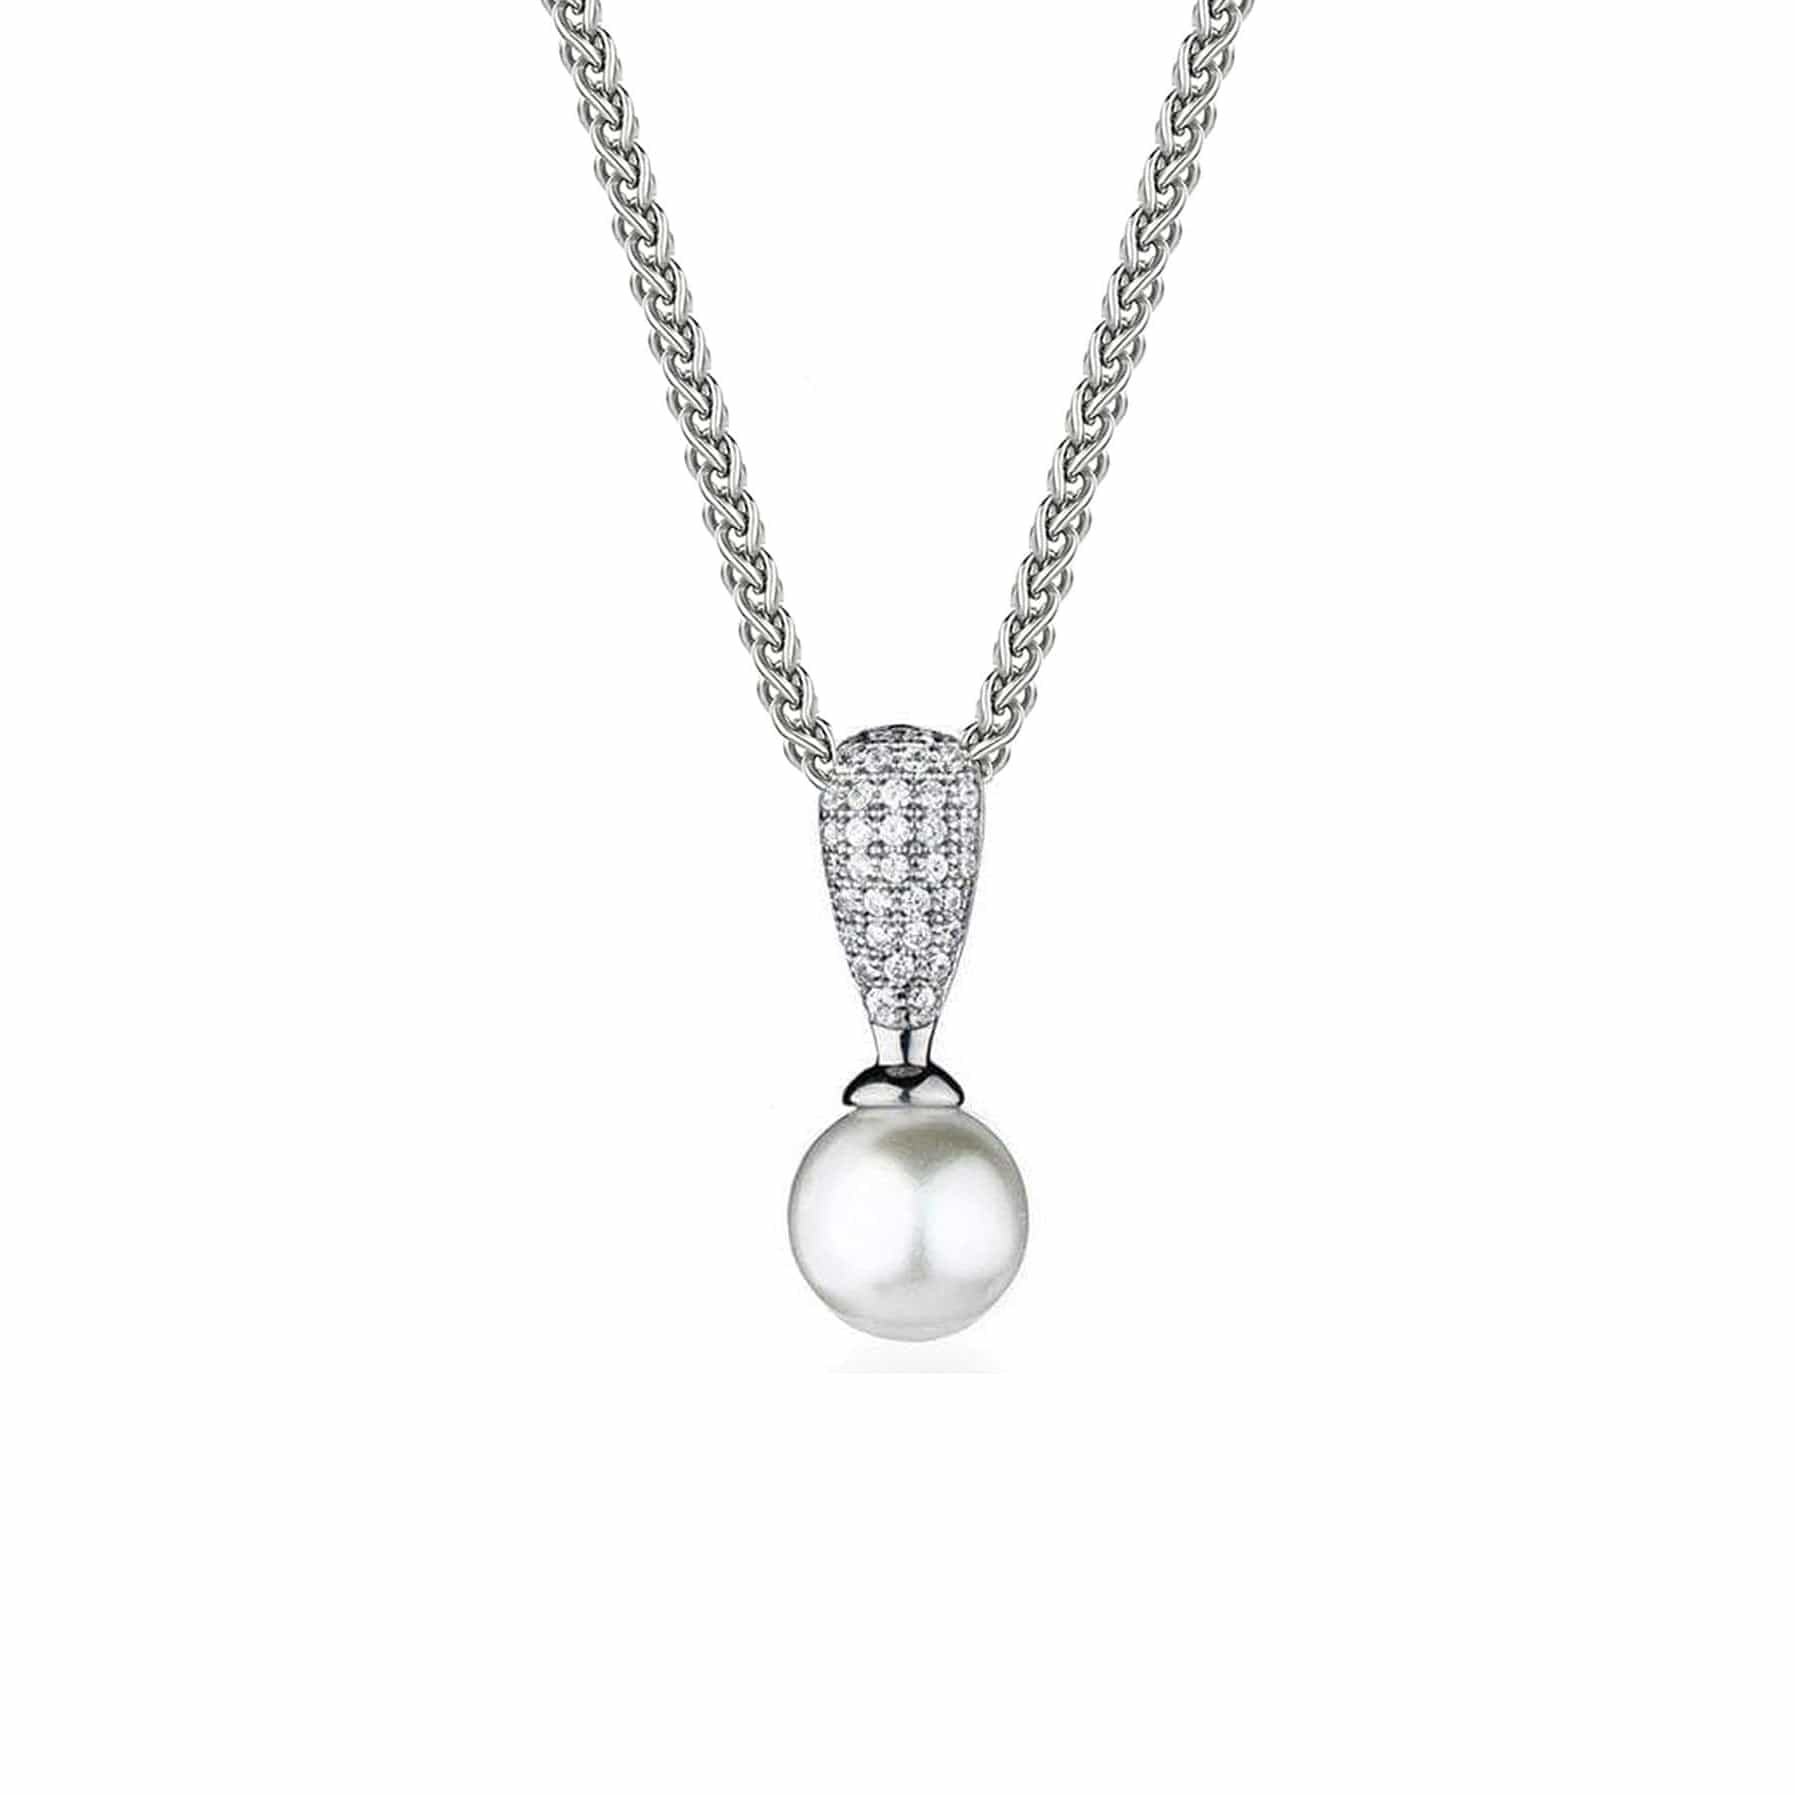 Lynora Silver Necklace Sterling Silver / Mother of Pearl Sterling Silver and Pearl Pendant